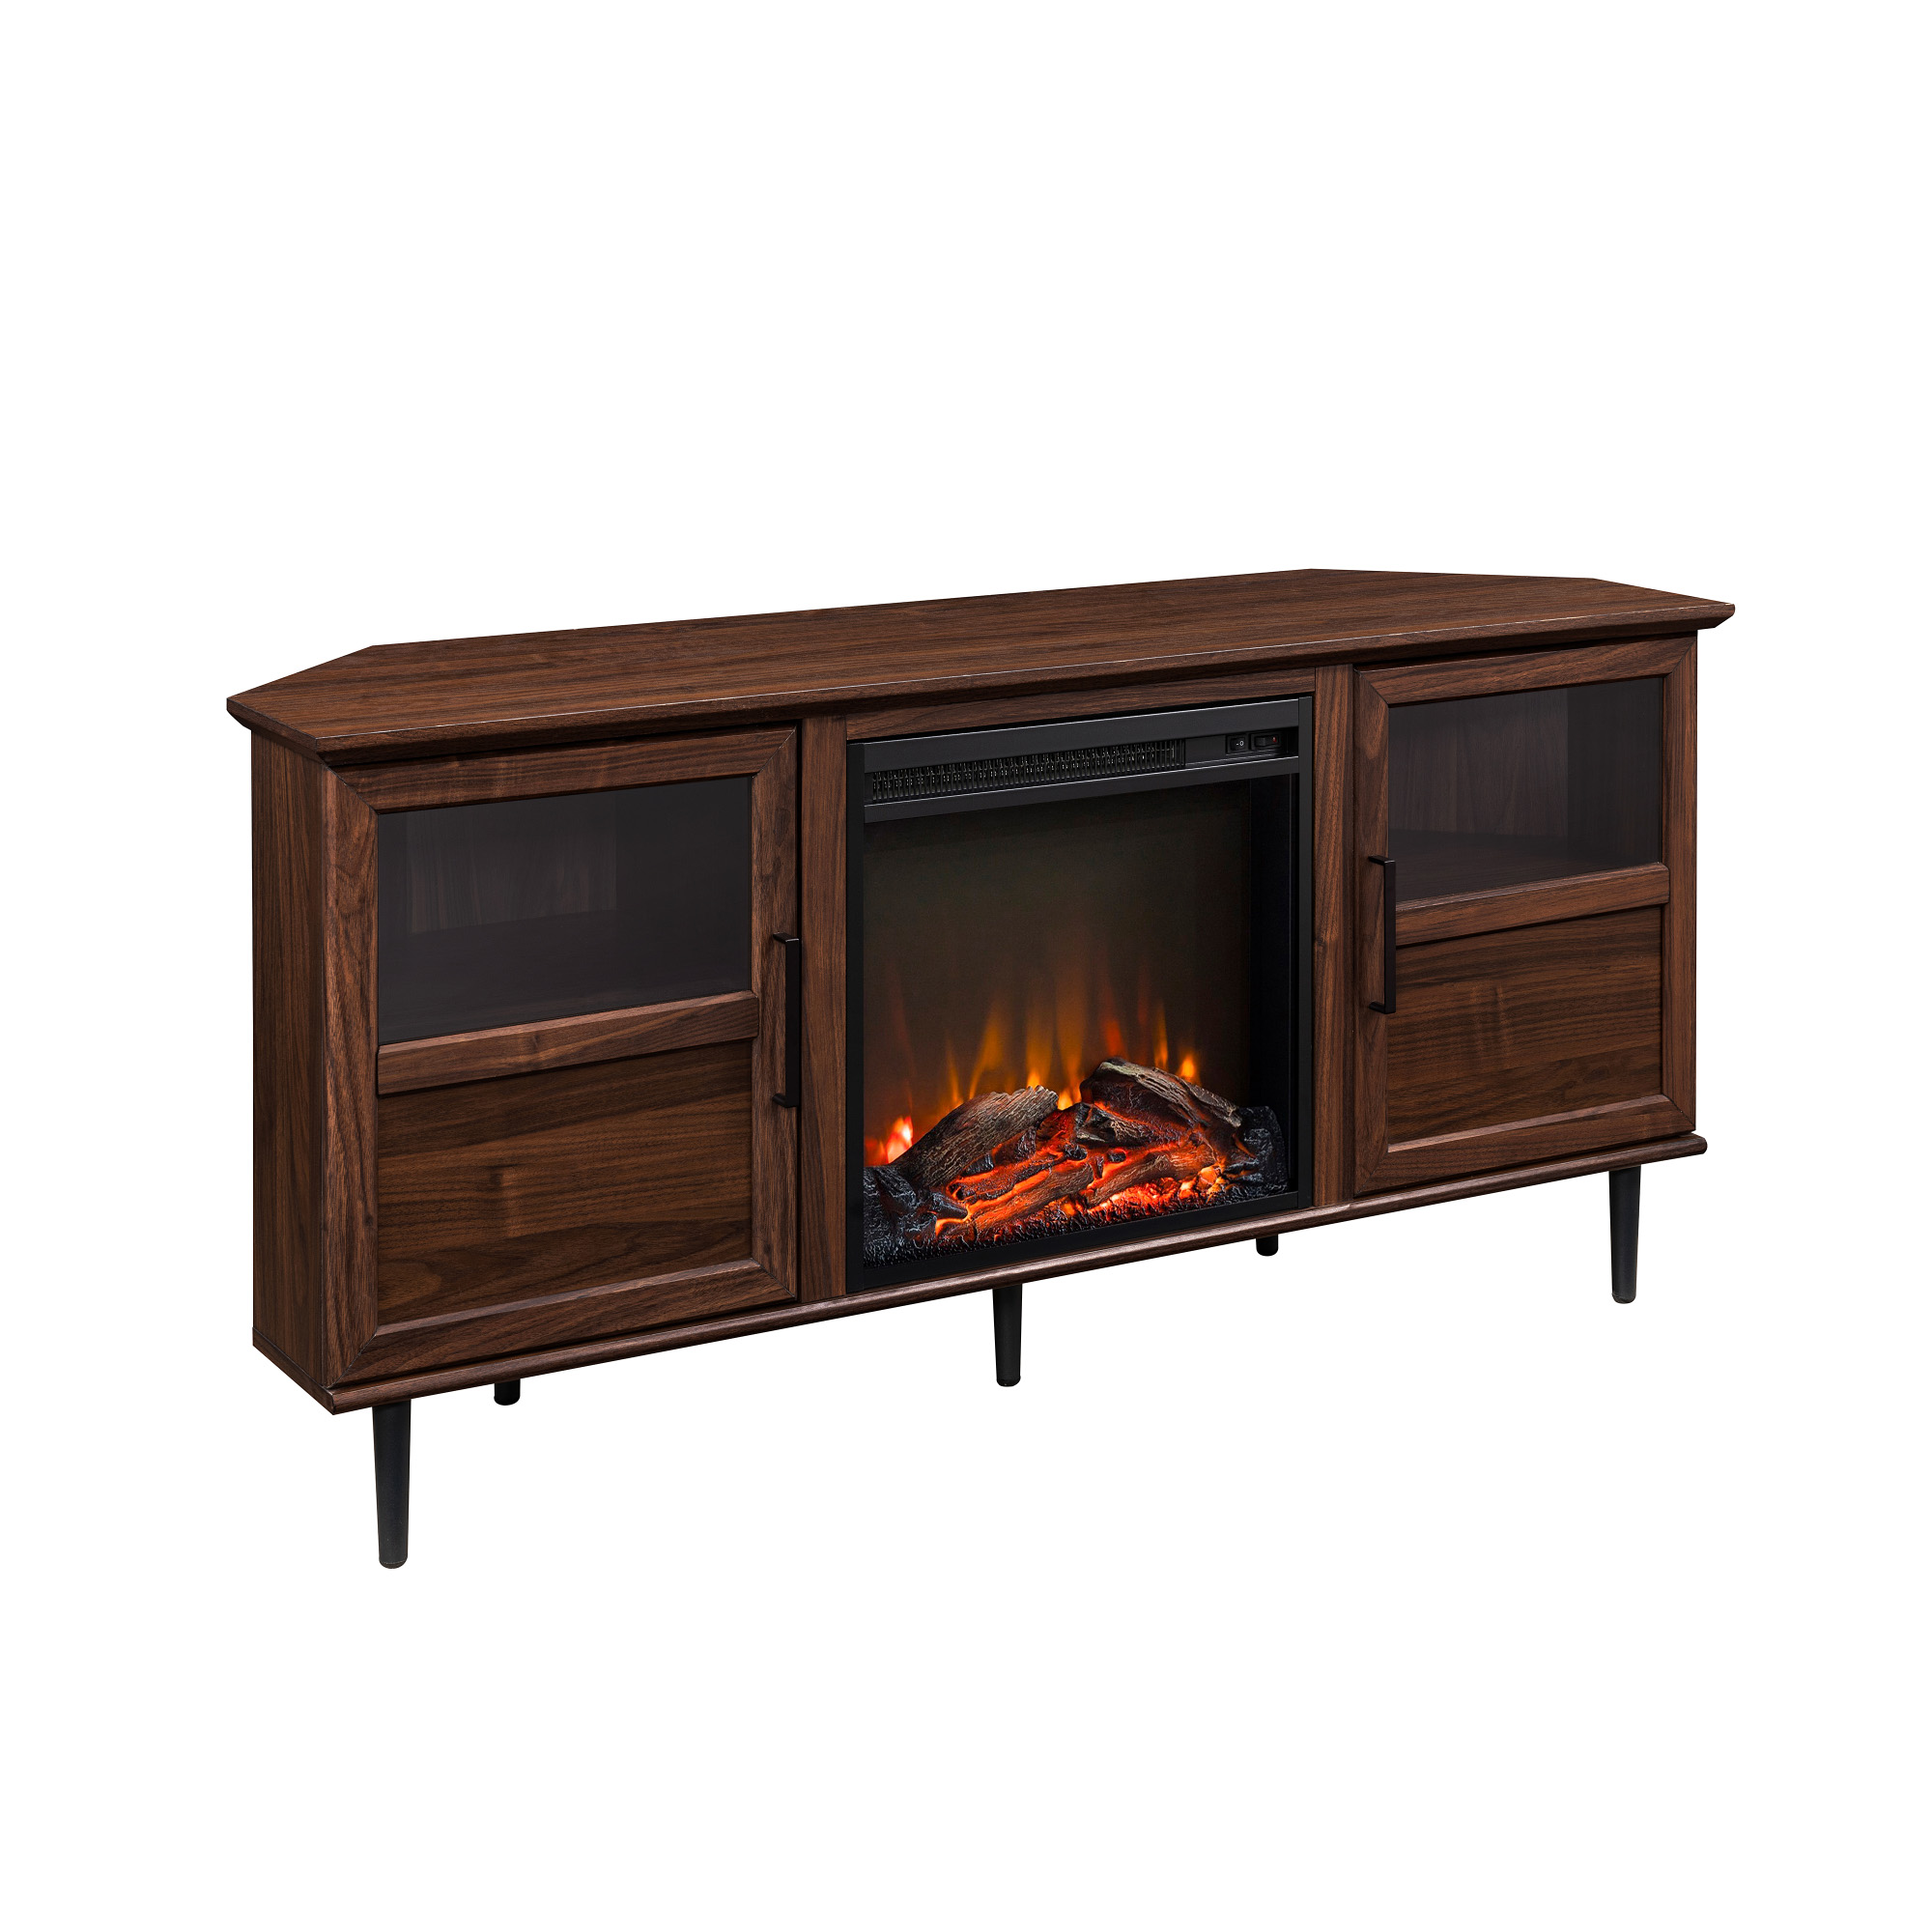 Walker Edison Panel Electric Fireplace Corner TV Stand for TVs up to 60”, Dark Walnut - image 5 of 11